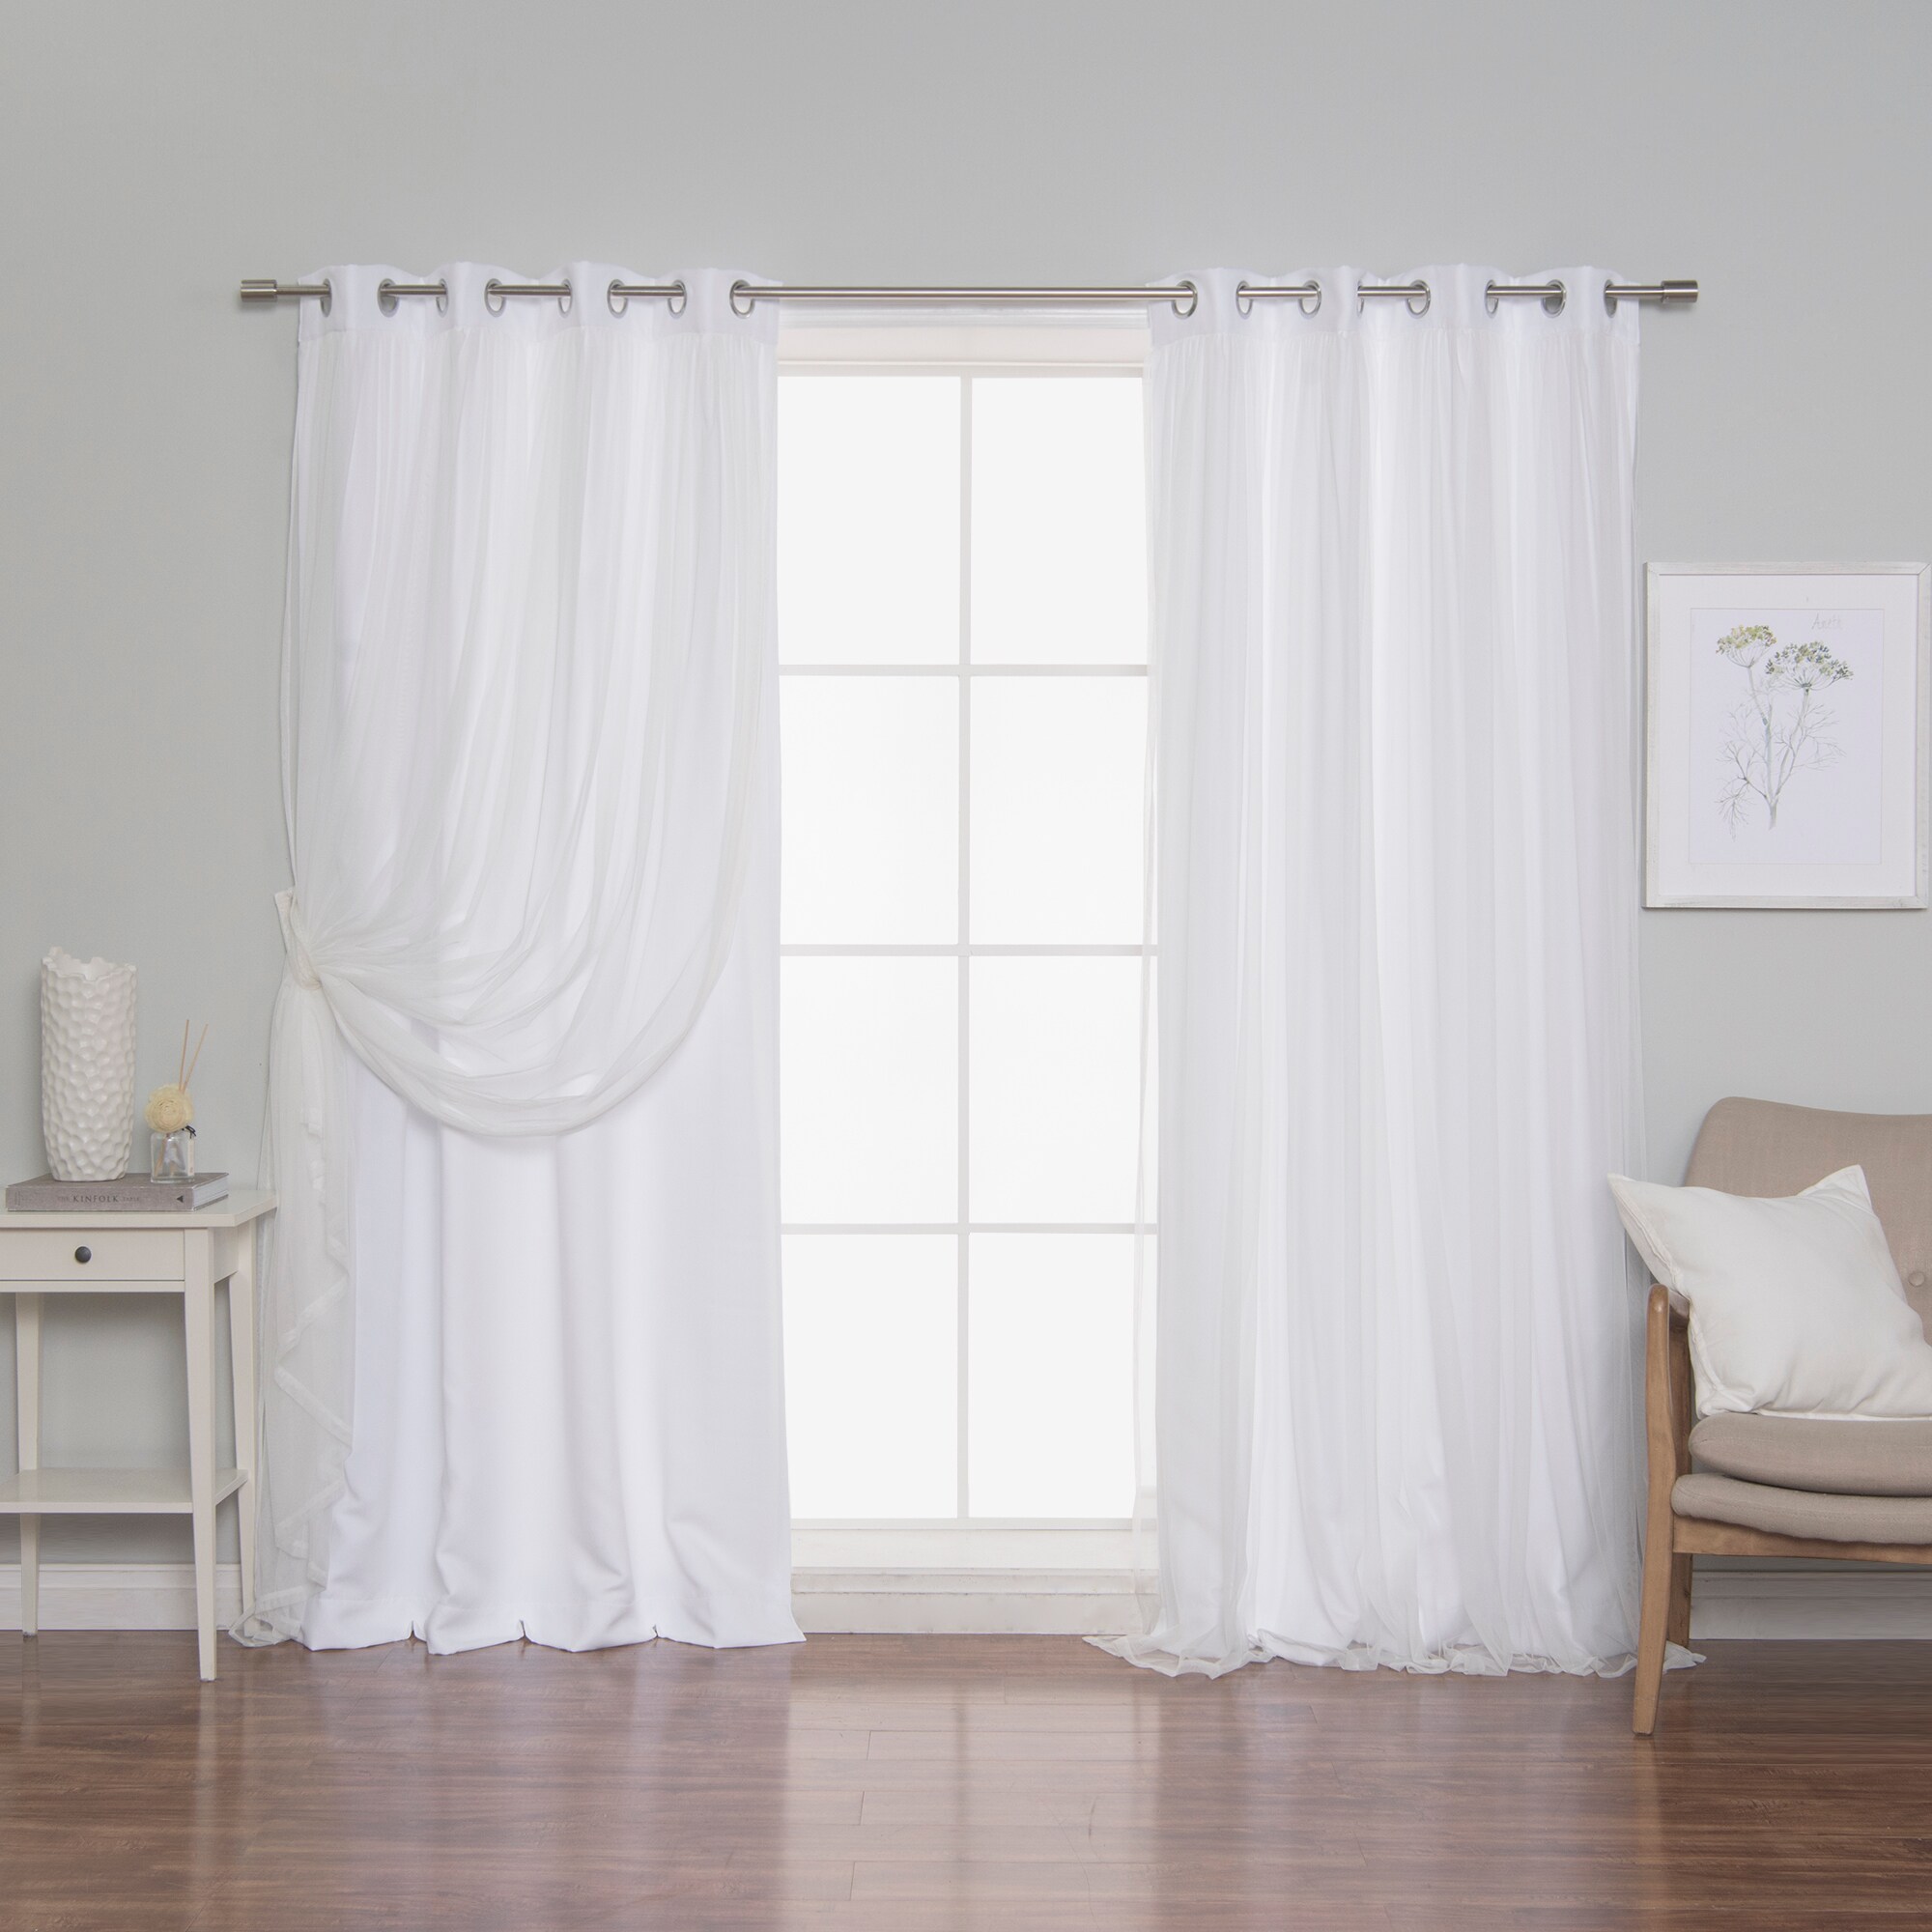 Big Flower Tulle Blackout Curtains Window Screening Drape Home Room Decoration 